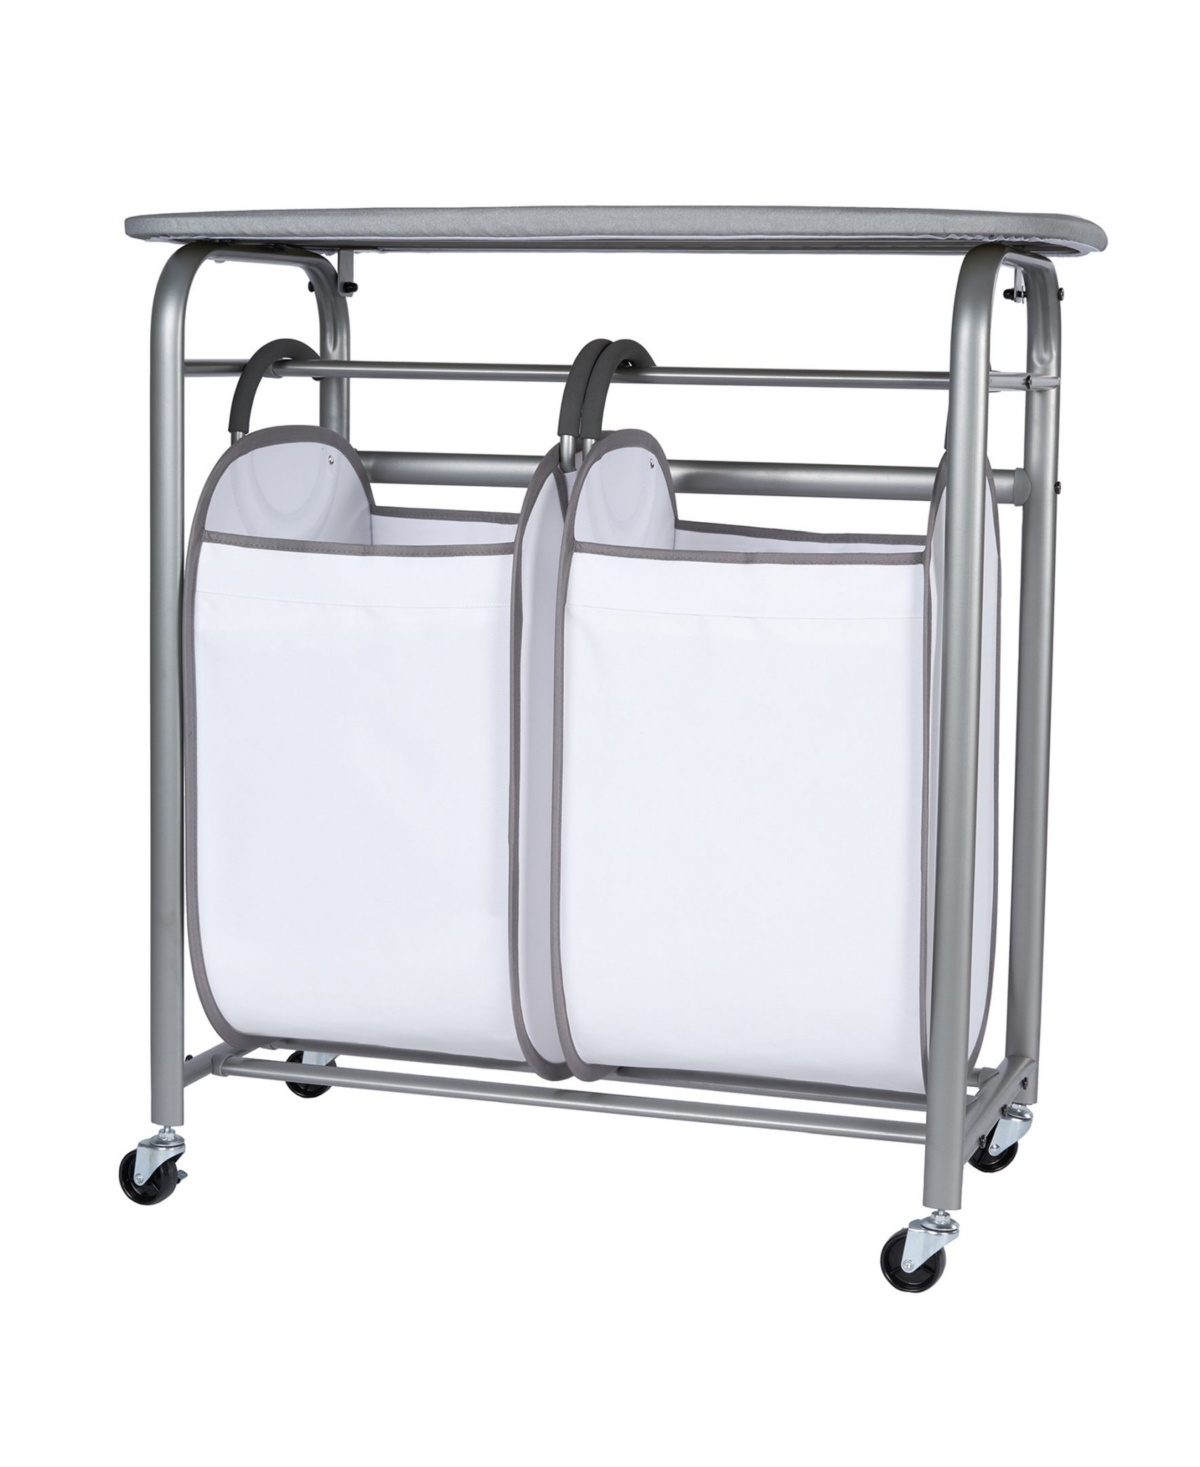 Easy Access Double Laundry Sorter with Folding Table - Brushed Nickel